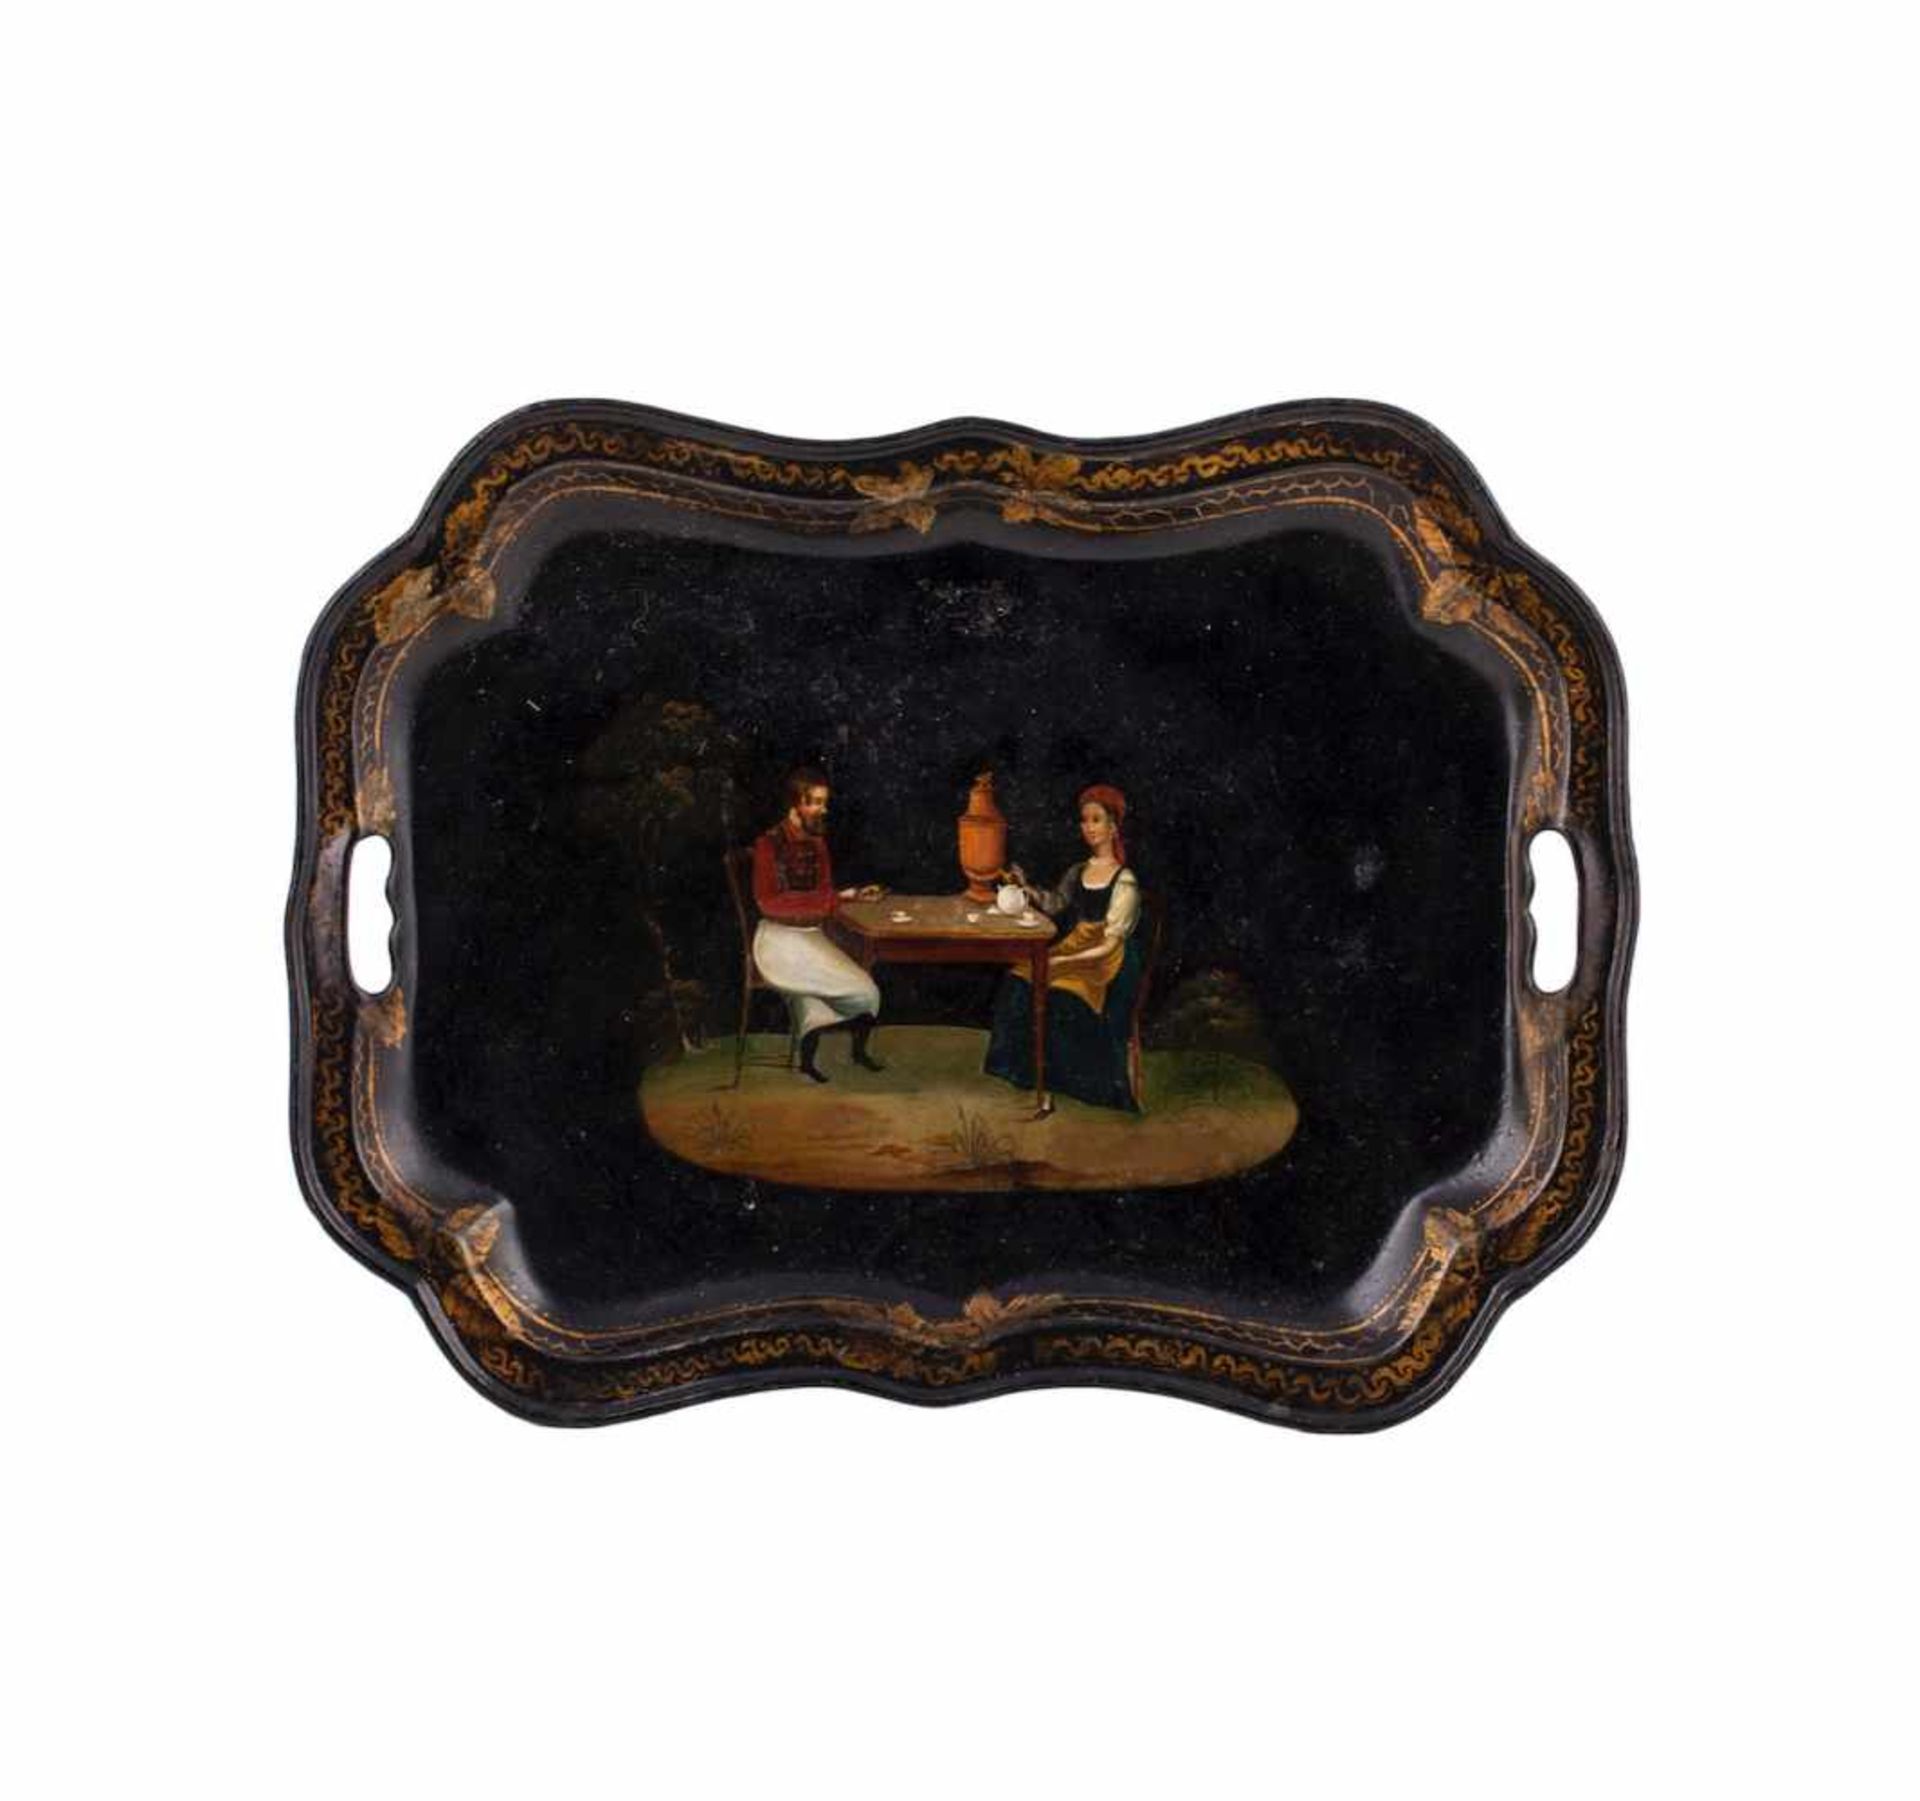 Russian tray with a painted tea drinking sceneRussian tray with a painted tea drinking scene.